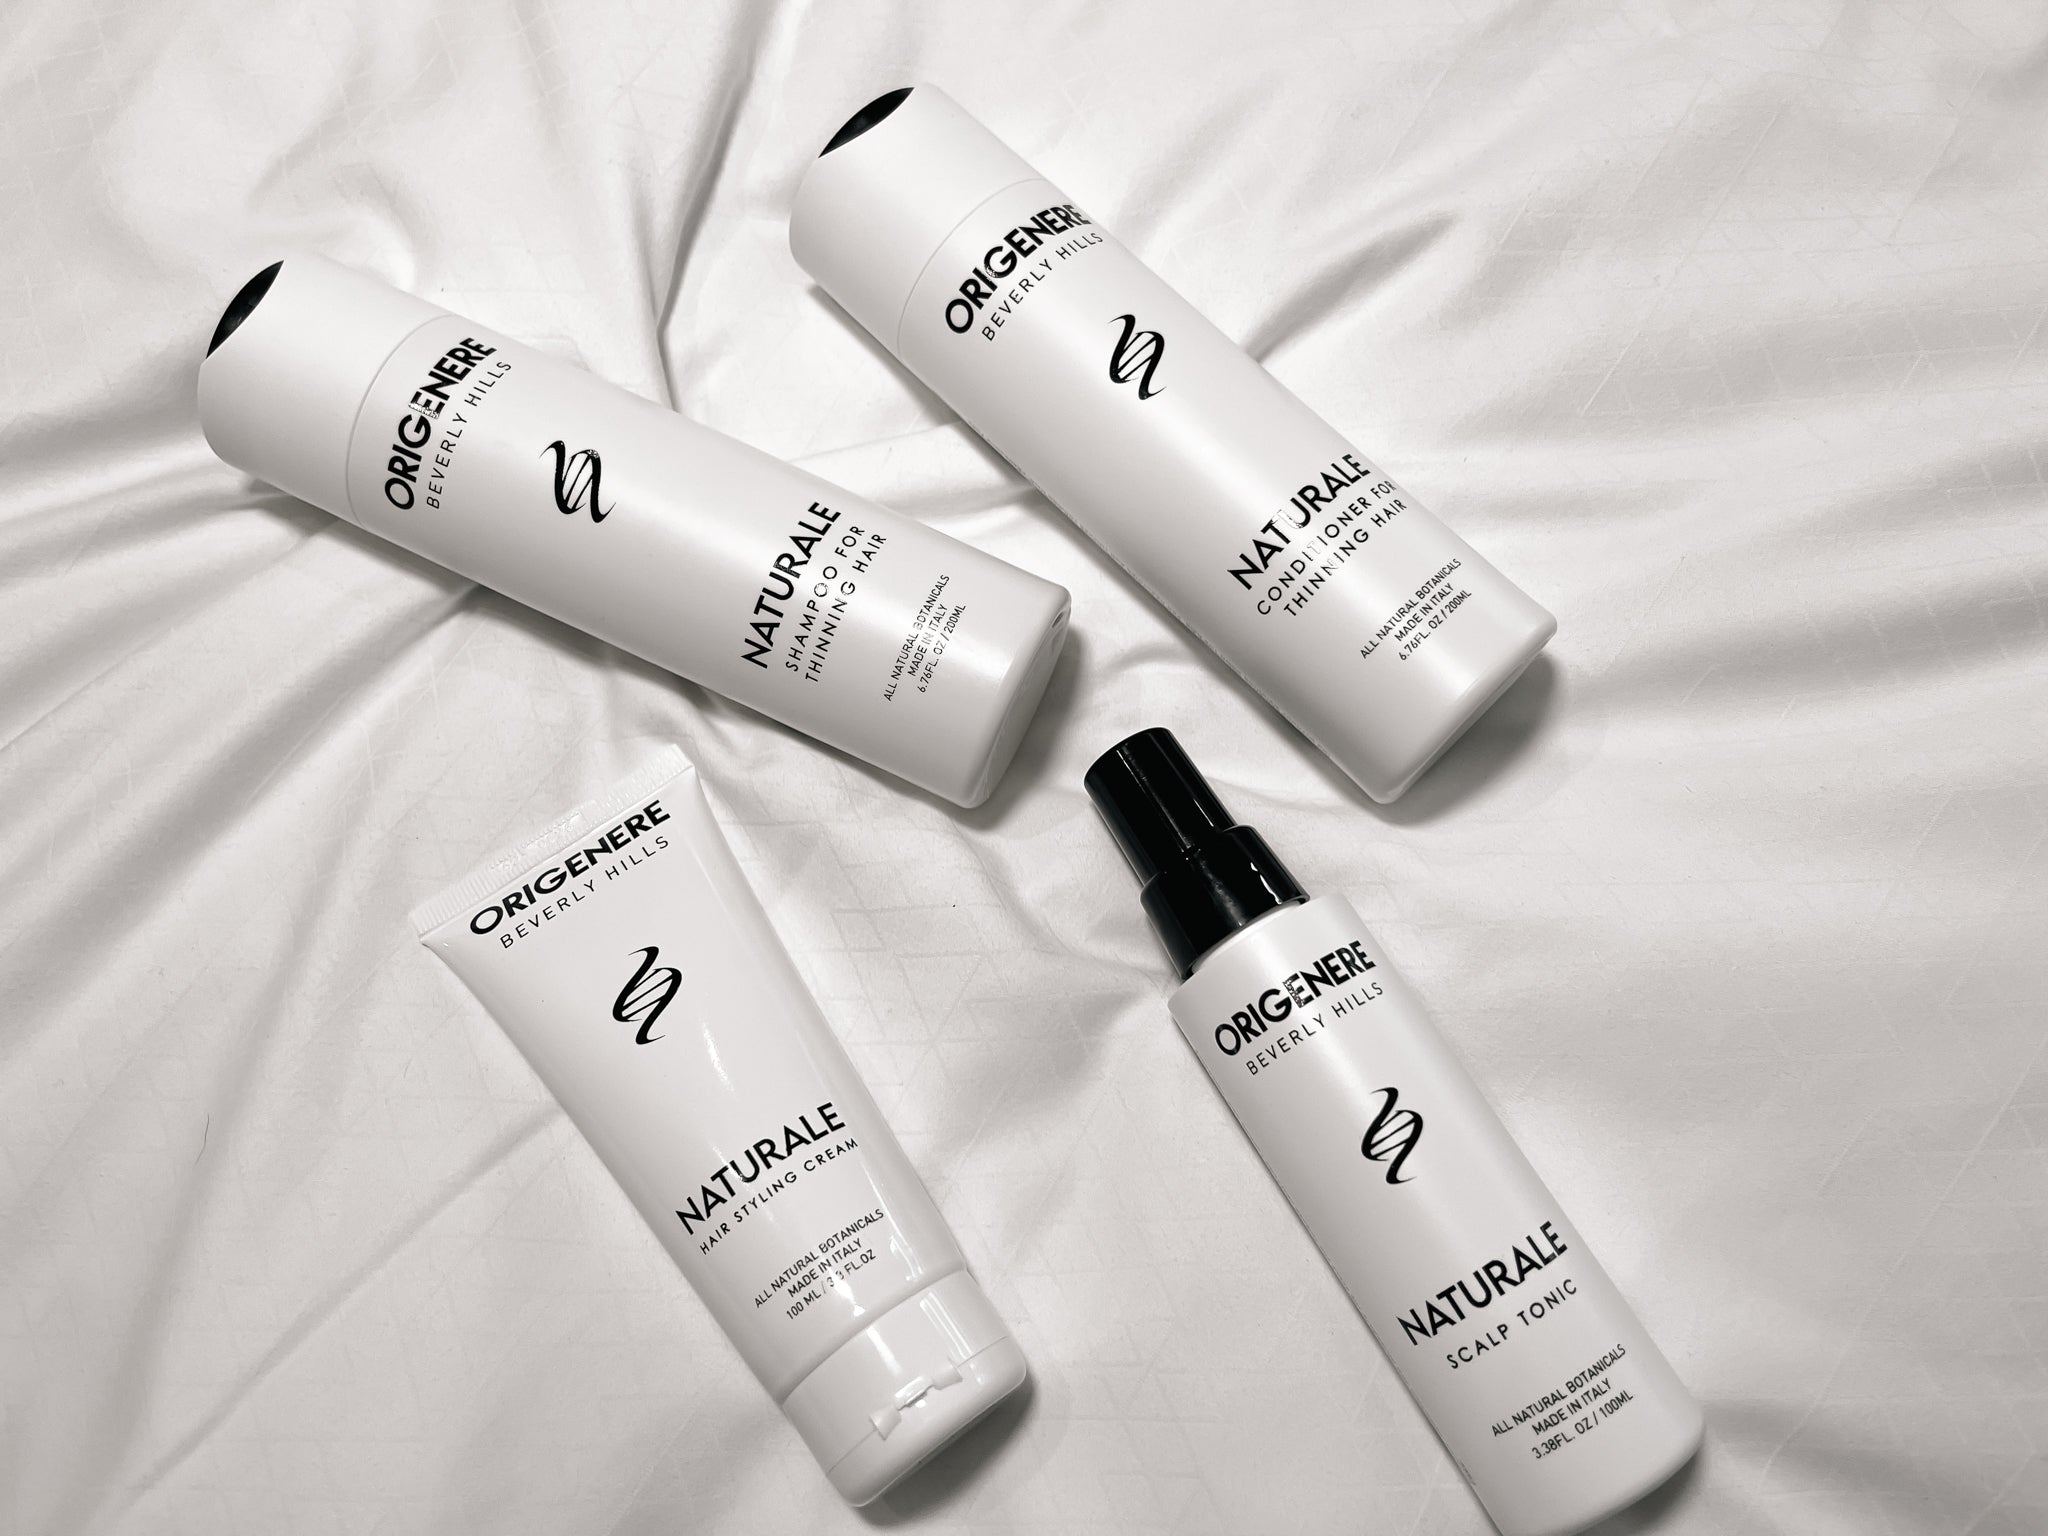 Origenere Naturale Hair System For Thinning Hair